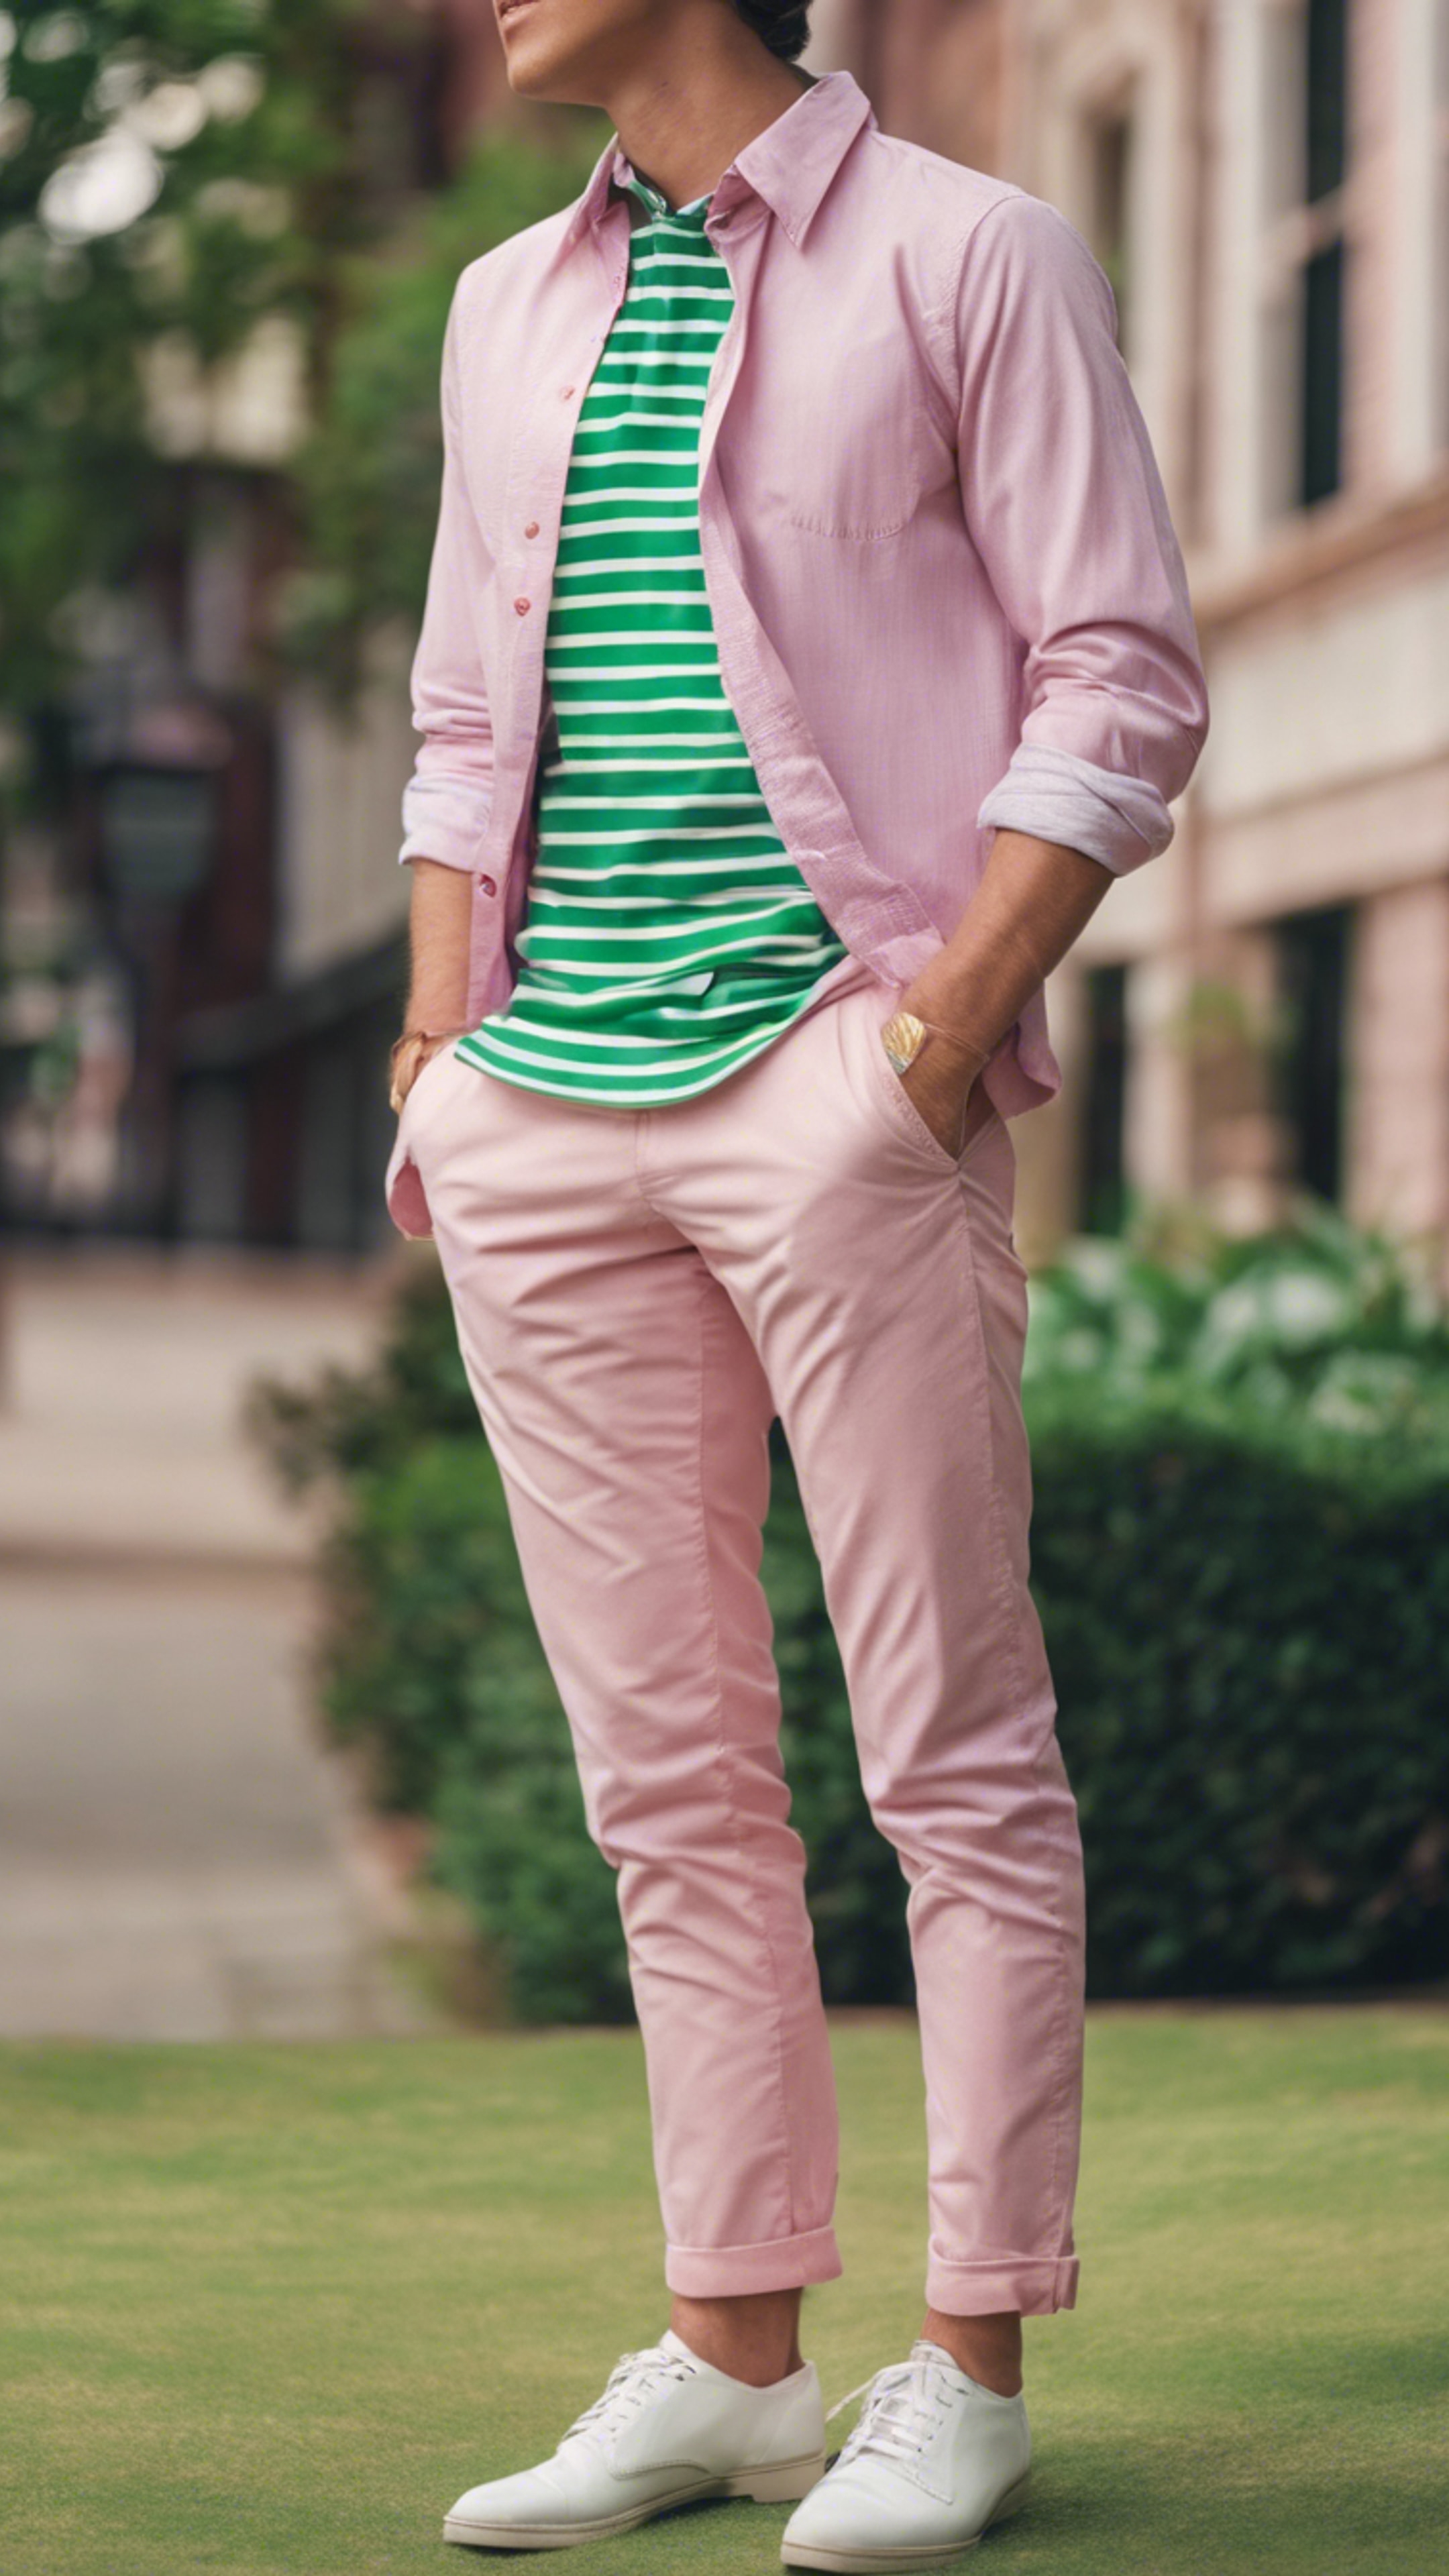 A classic preppy outfit in pink chinos with a green striped Oxford shirt. Sfondo[7b2809c9502f40299443]